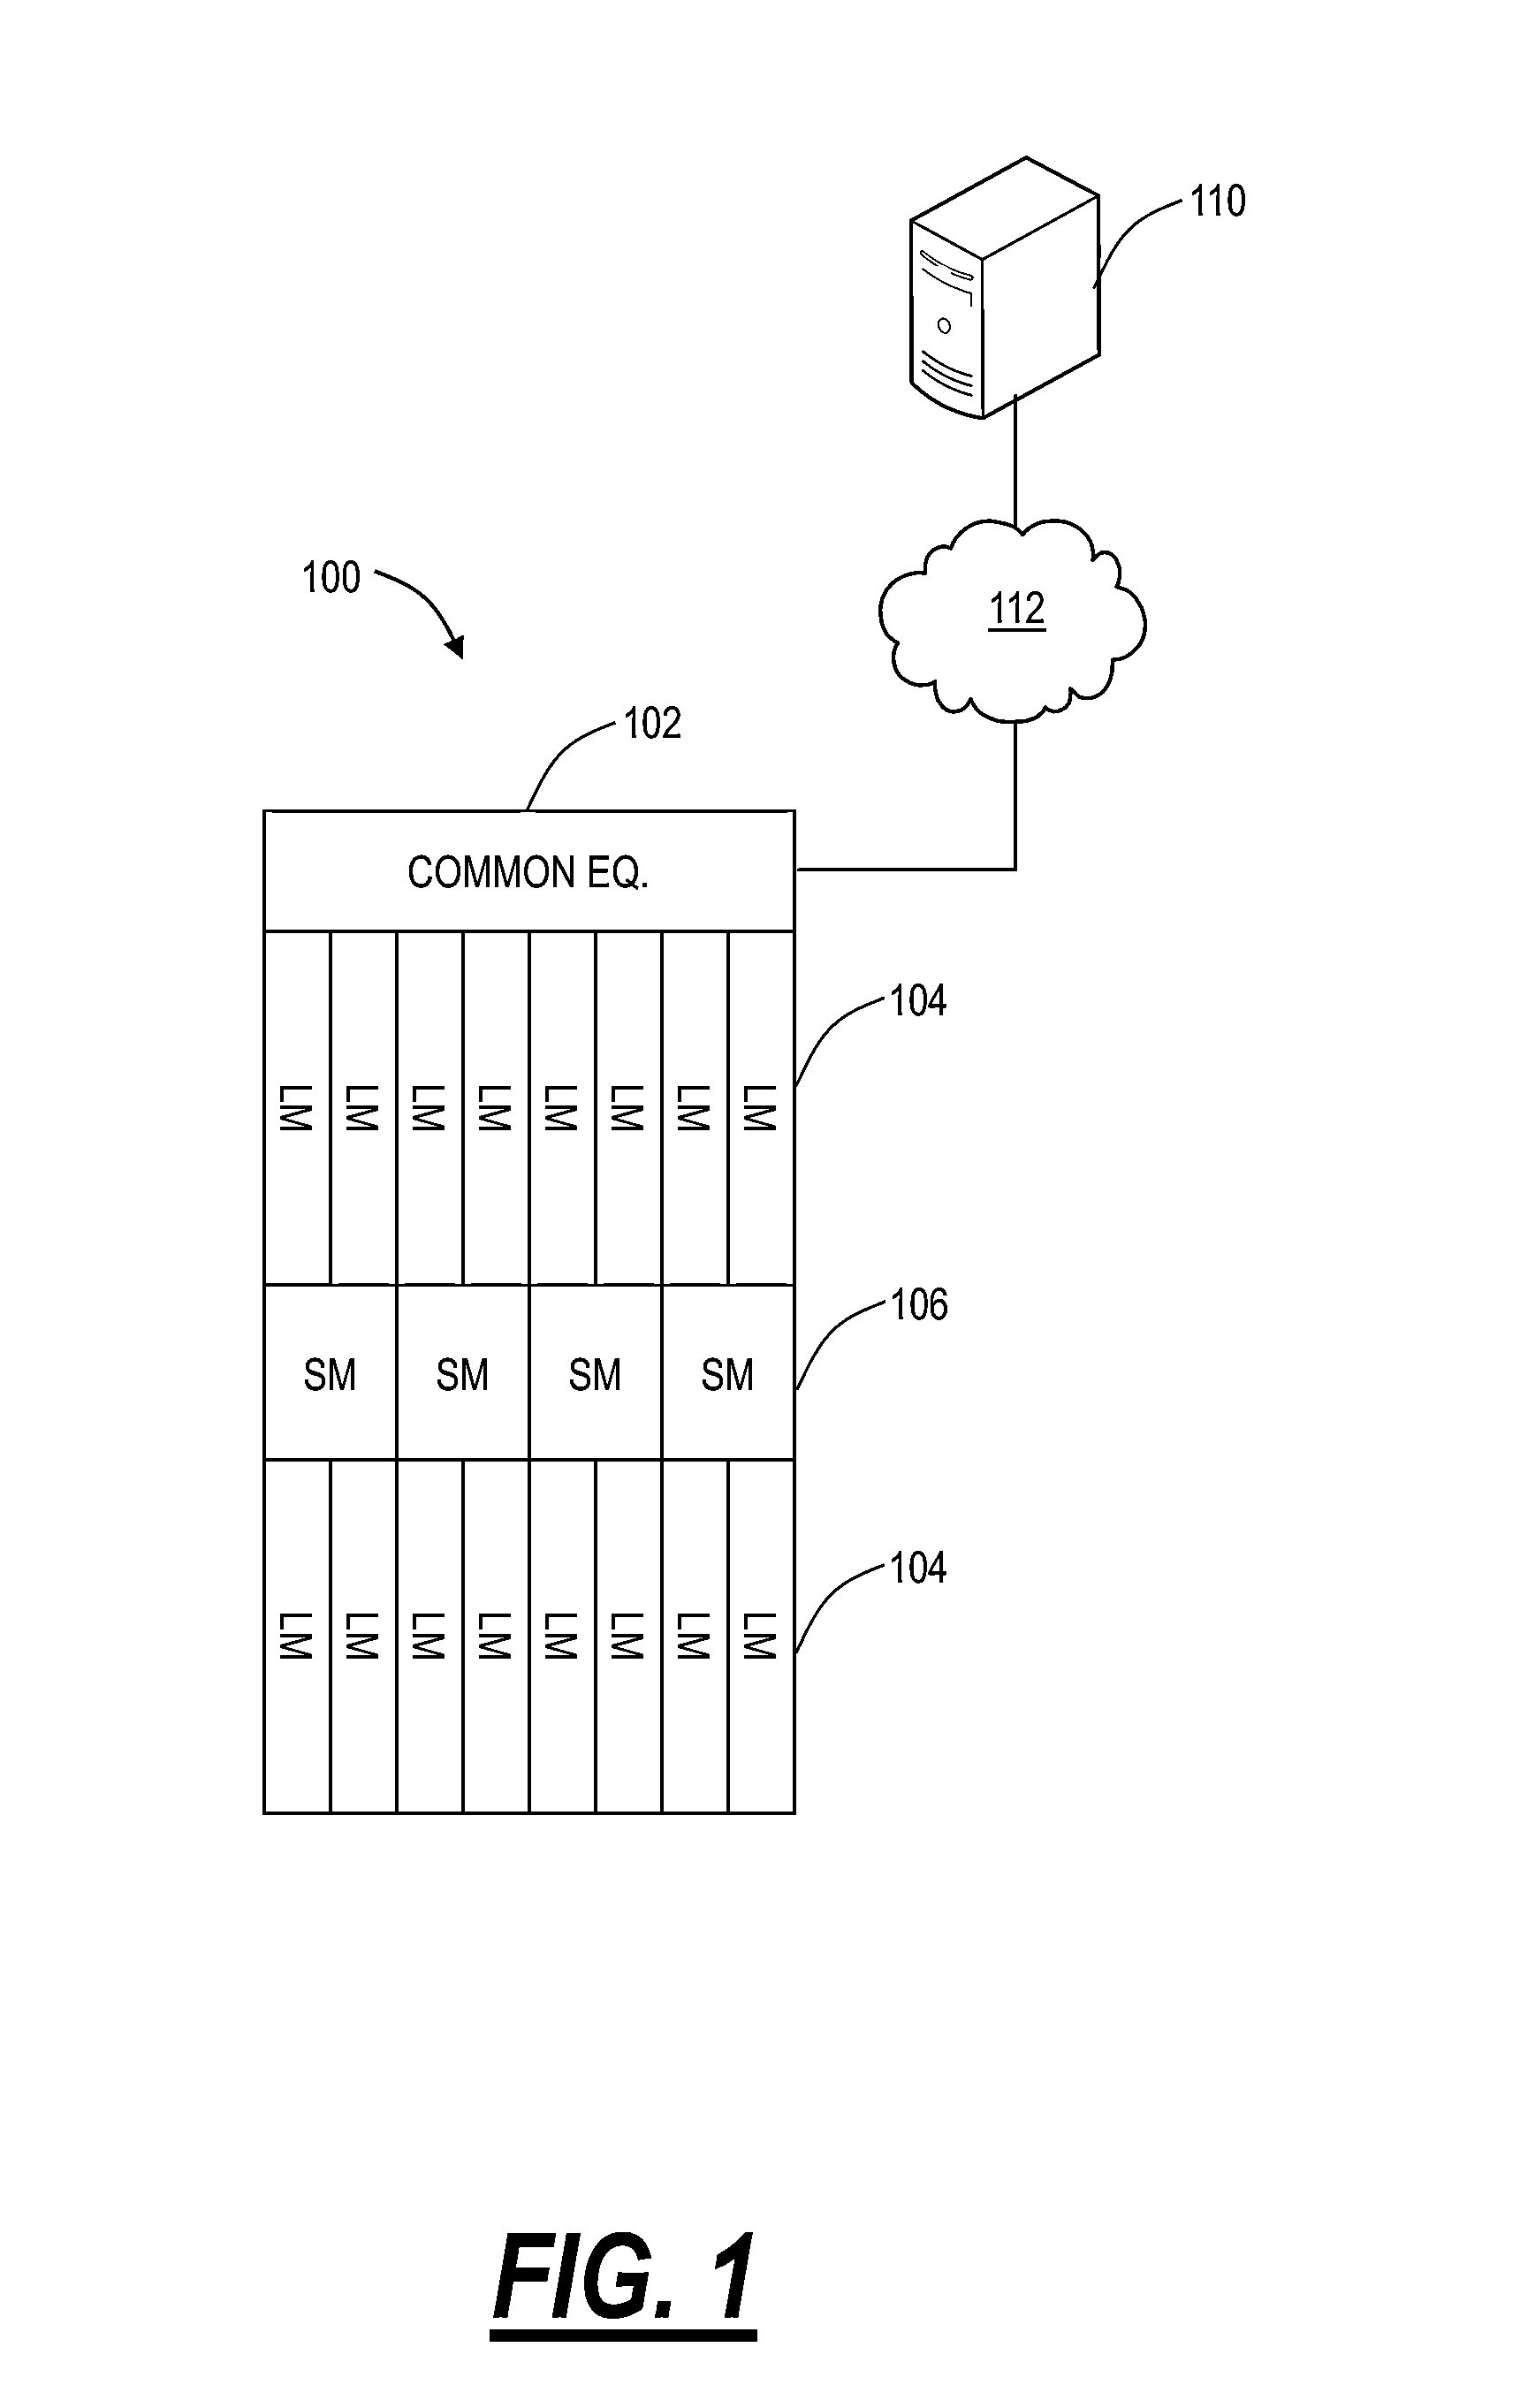 Systems and methods for detecting line flapping in optical networks